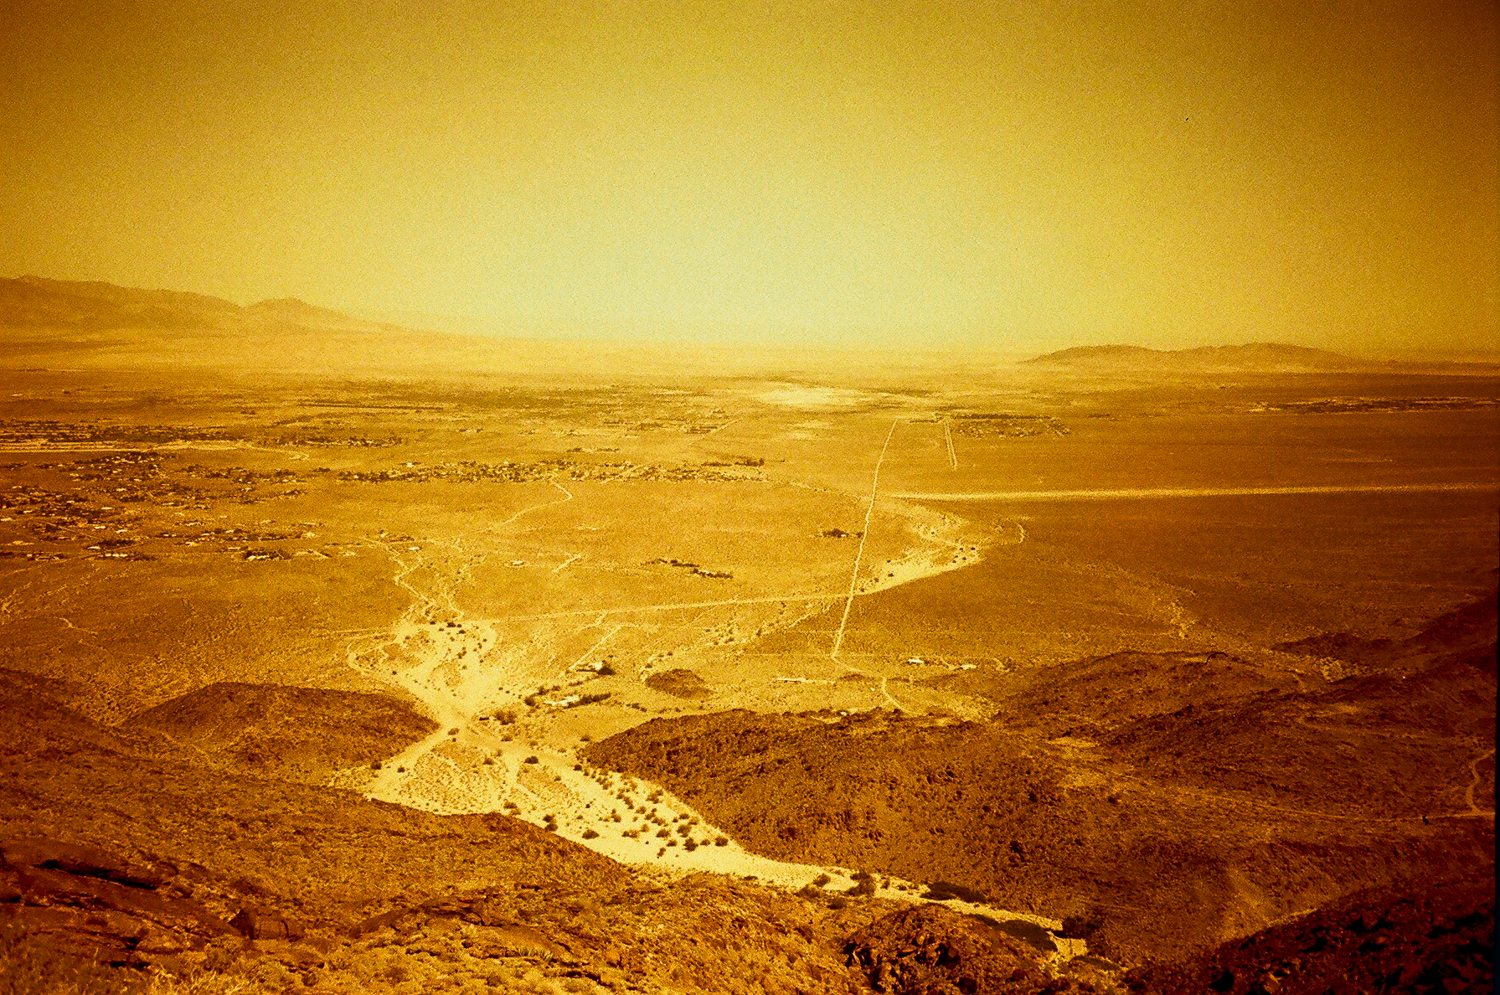  Redscale valley 